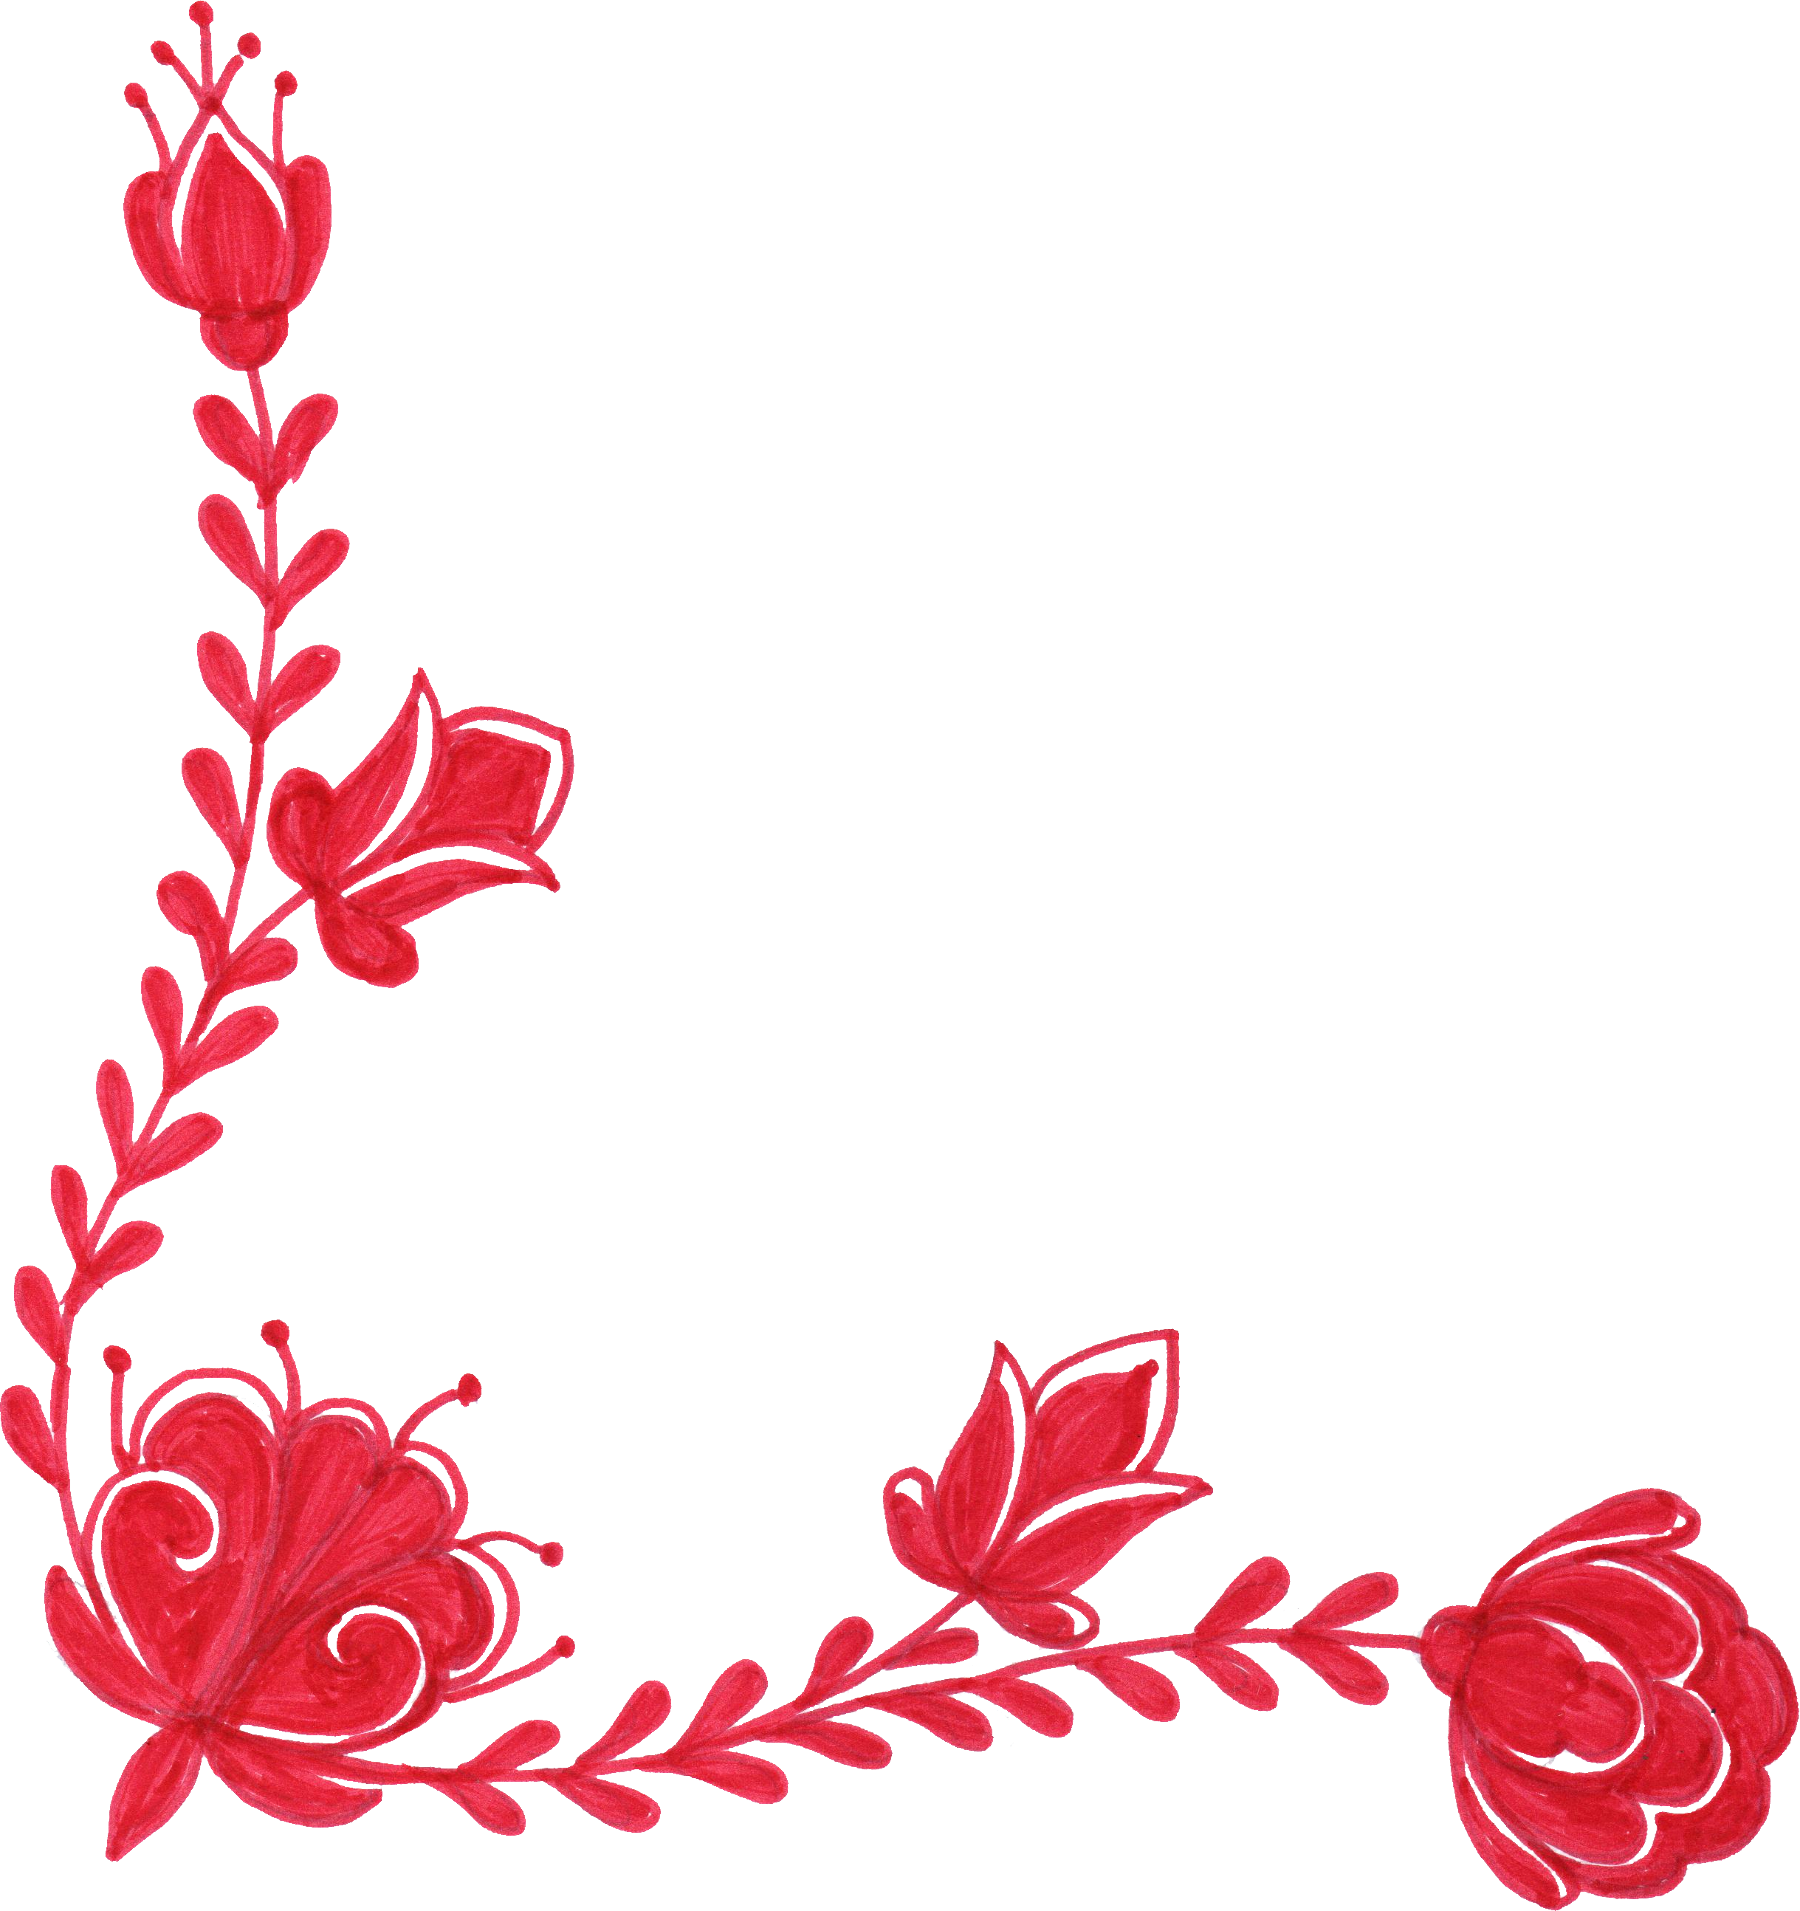 6 Red Flower Corner Ornament - Red Flower Ornament Png (1800x1911)